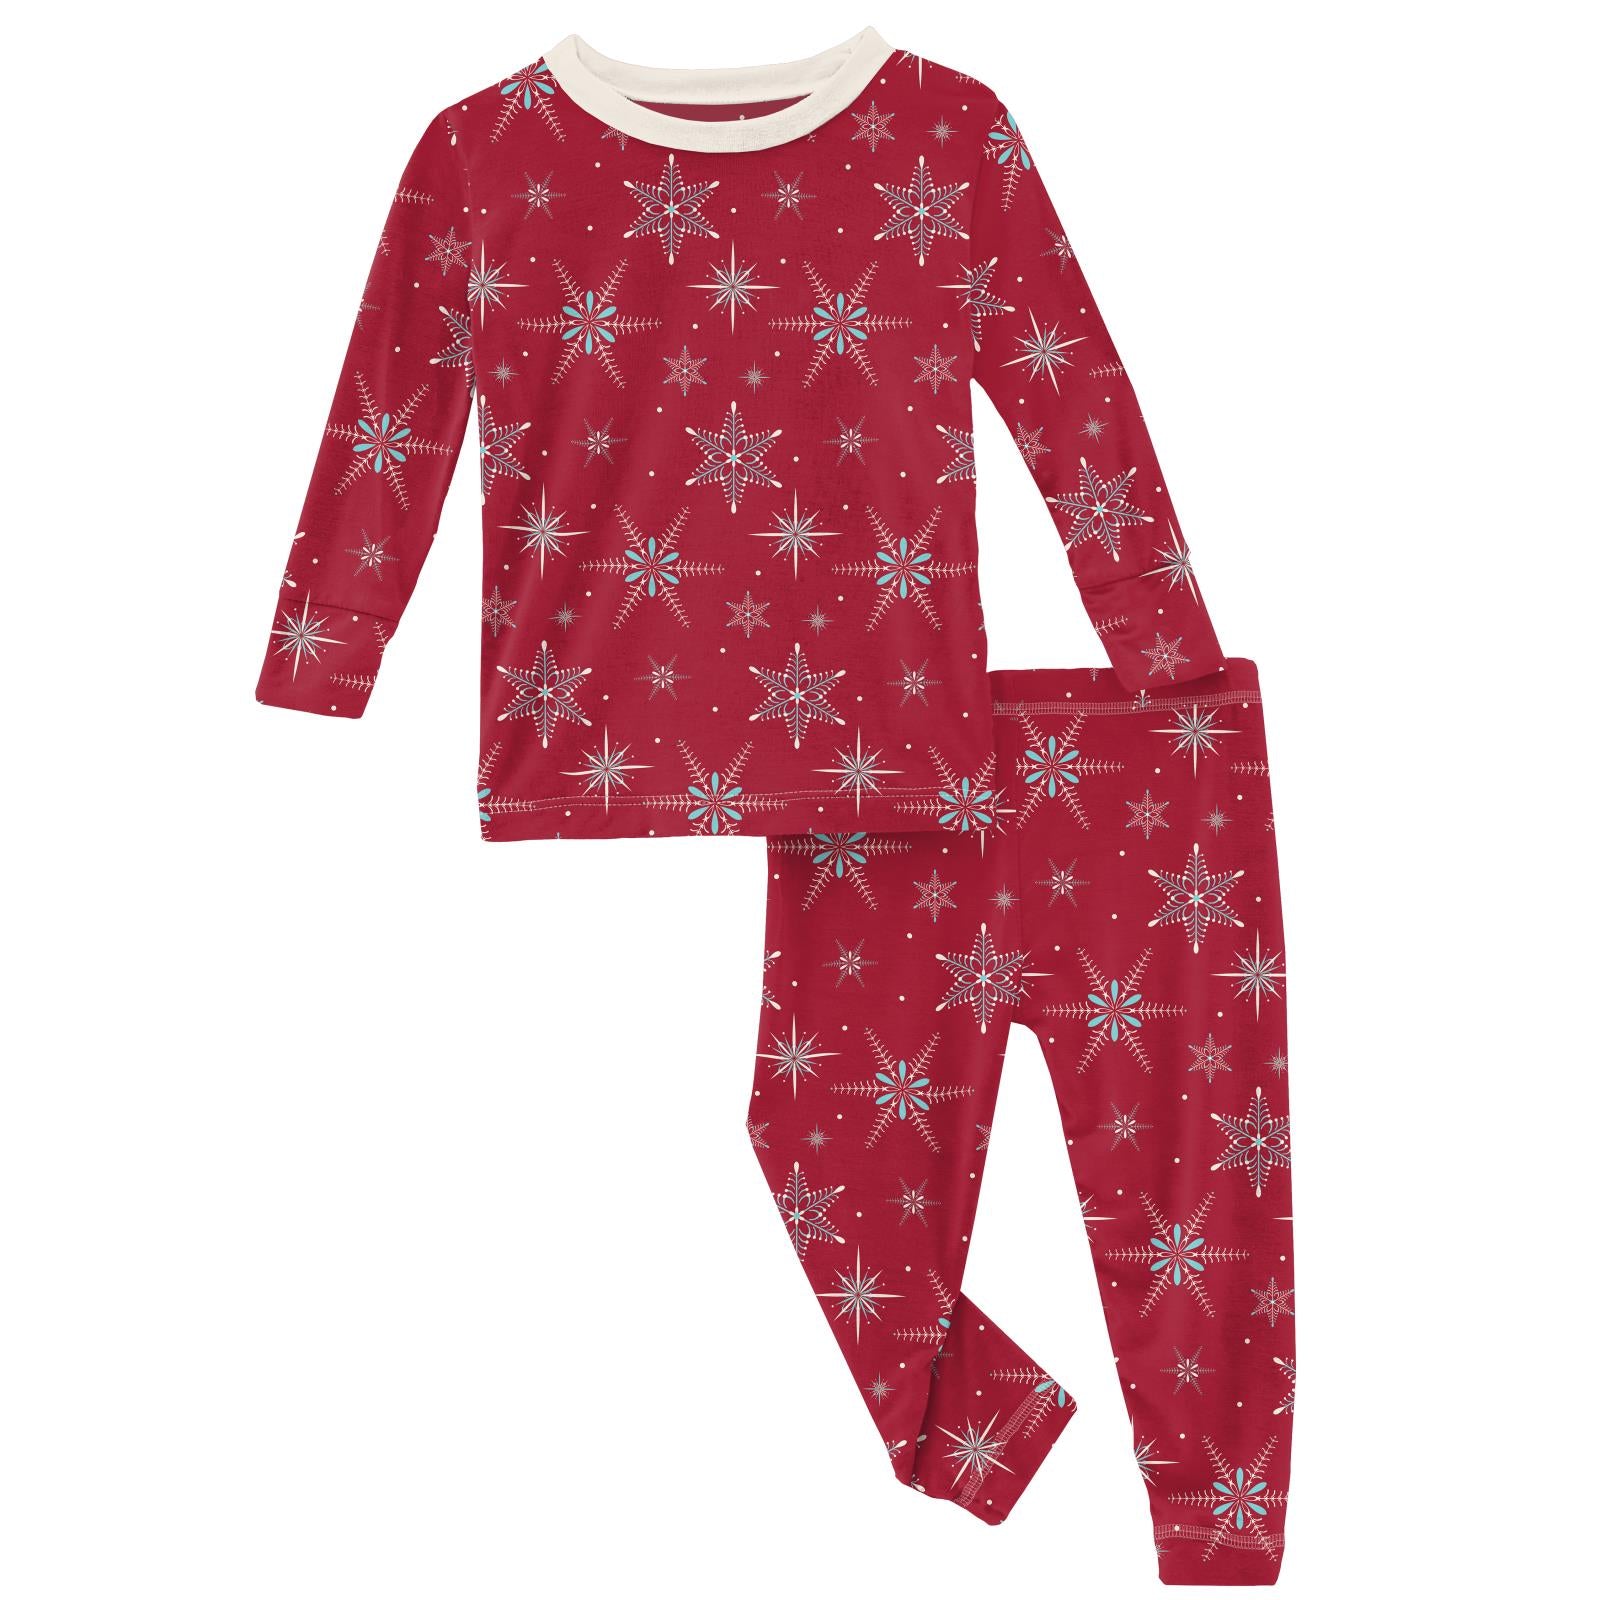 Snow Day Chic: Cute And Cozy Sleepwear To Buy Now #pajamas